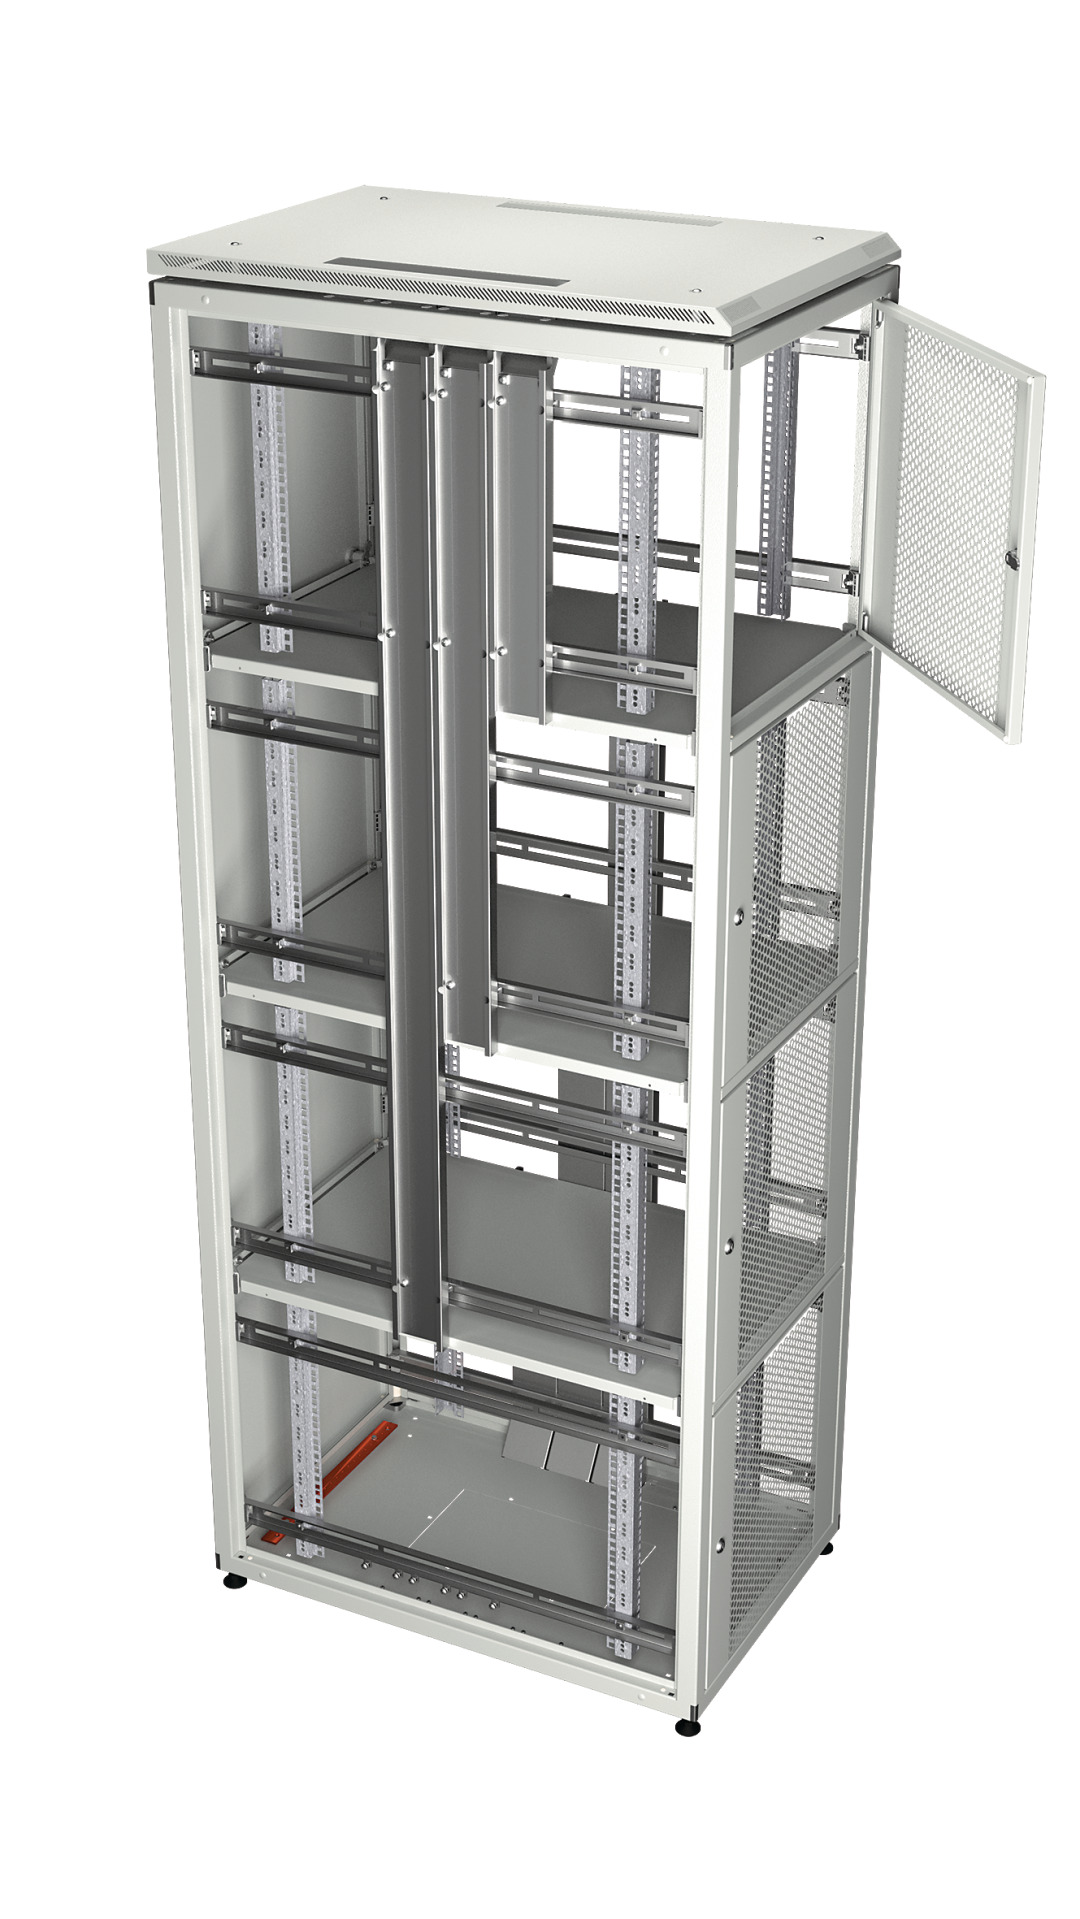 Co-Location Rack PRO, 2 x 20HE, 600x1000 mm, F+R 1-tlg. perforiert, RAL9005